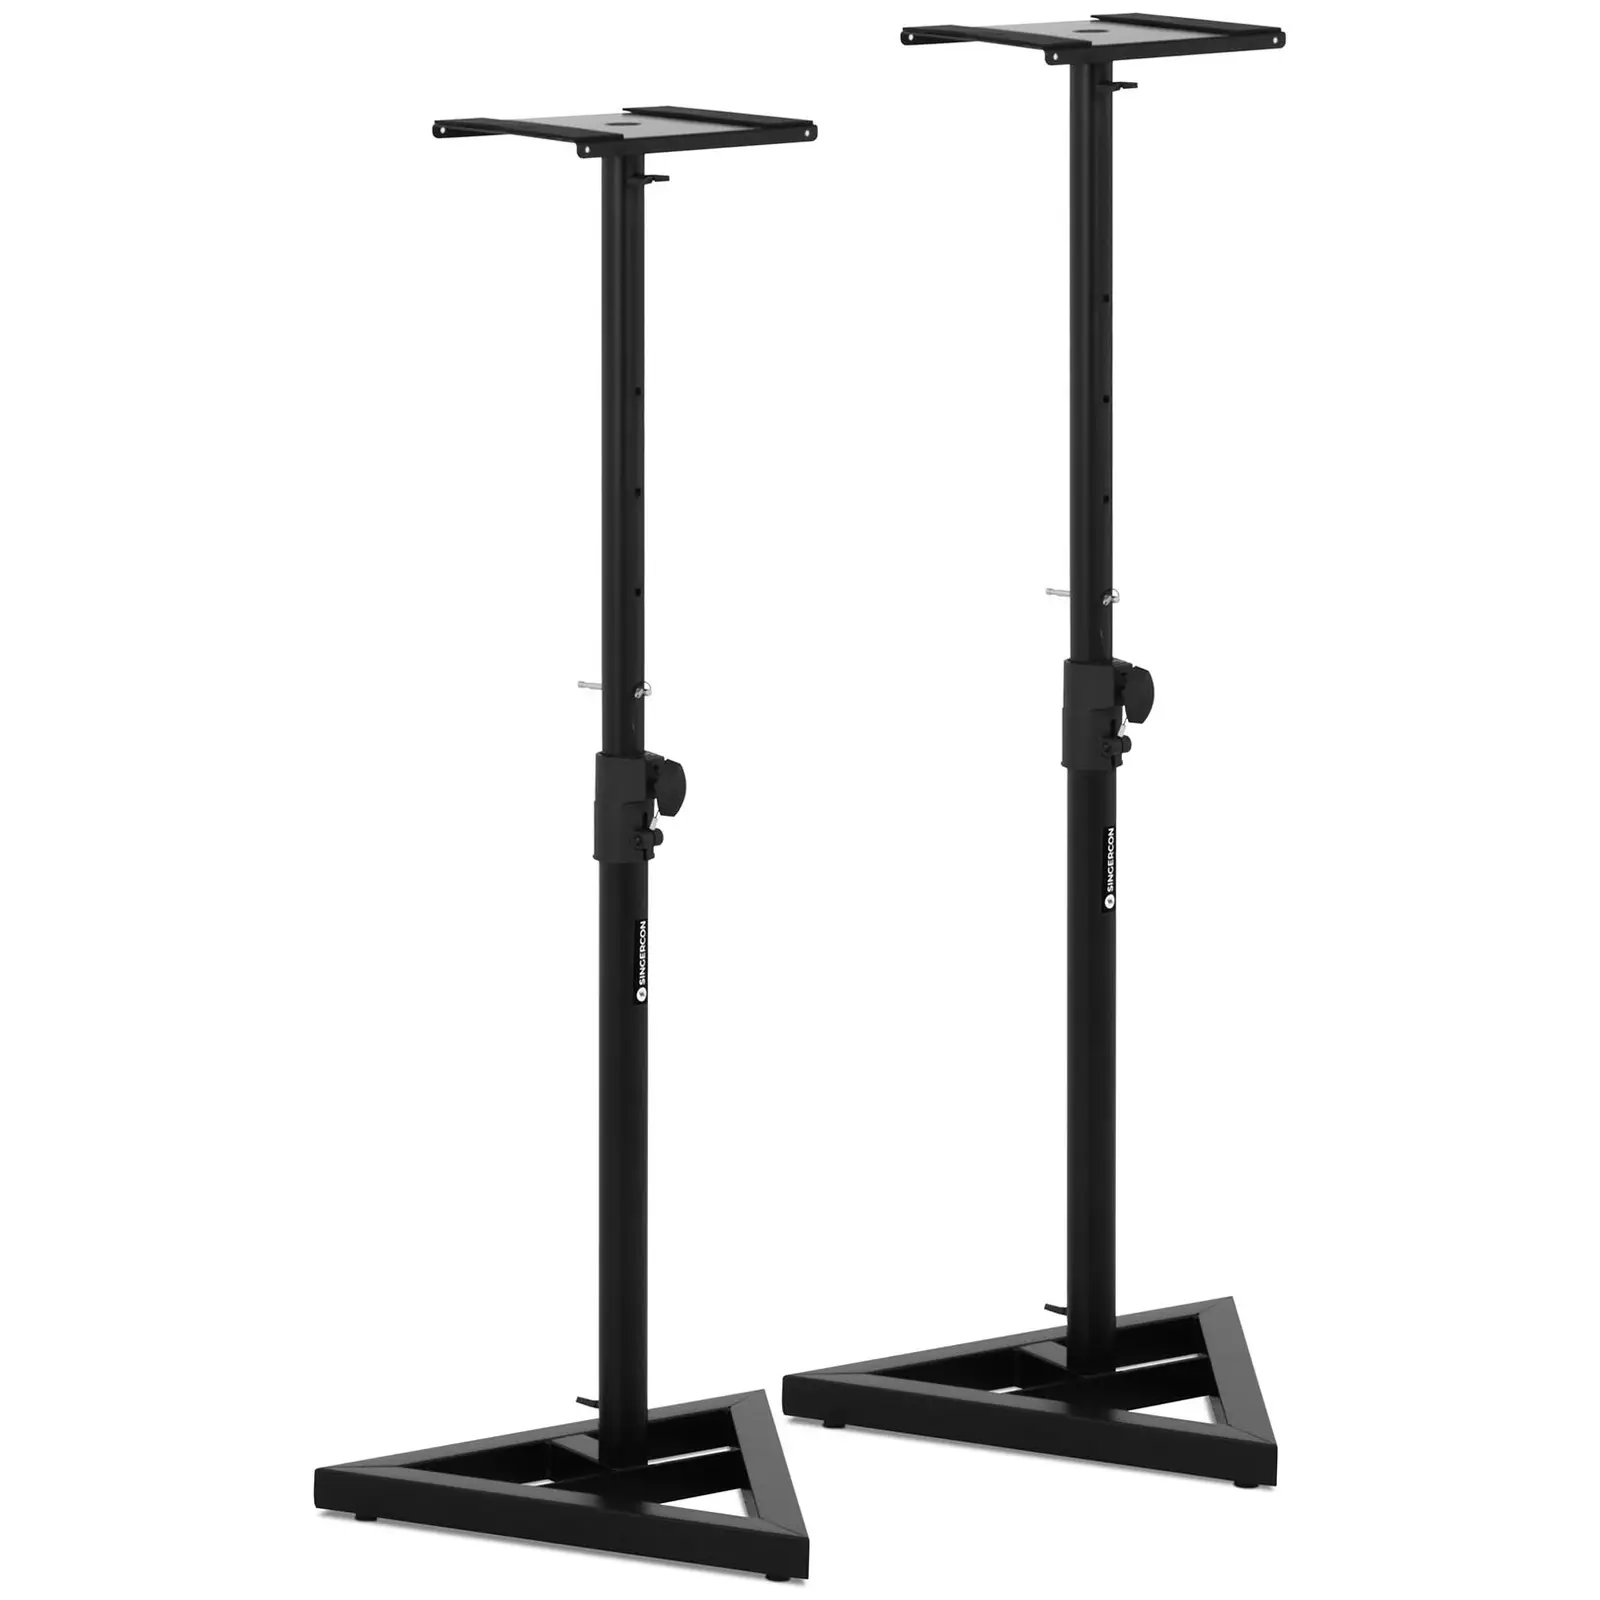 Floor Speaker Stand - 1 pair - up to 40 kg - 83 to 115 cm